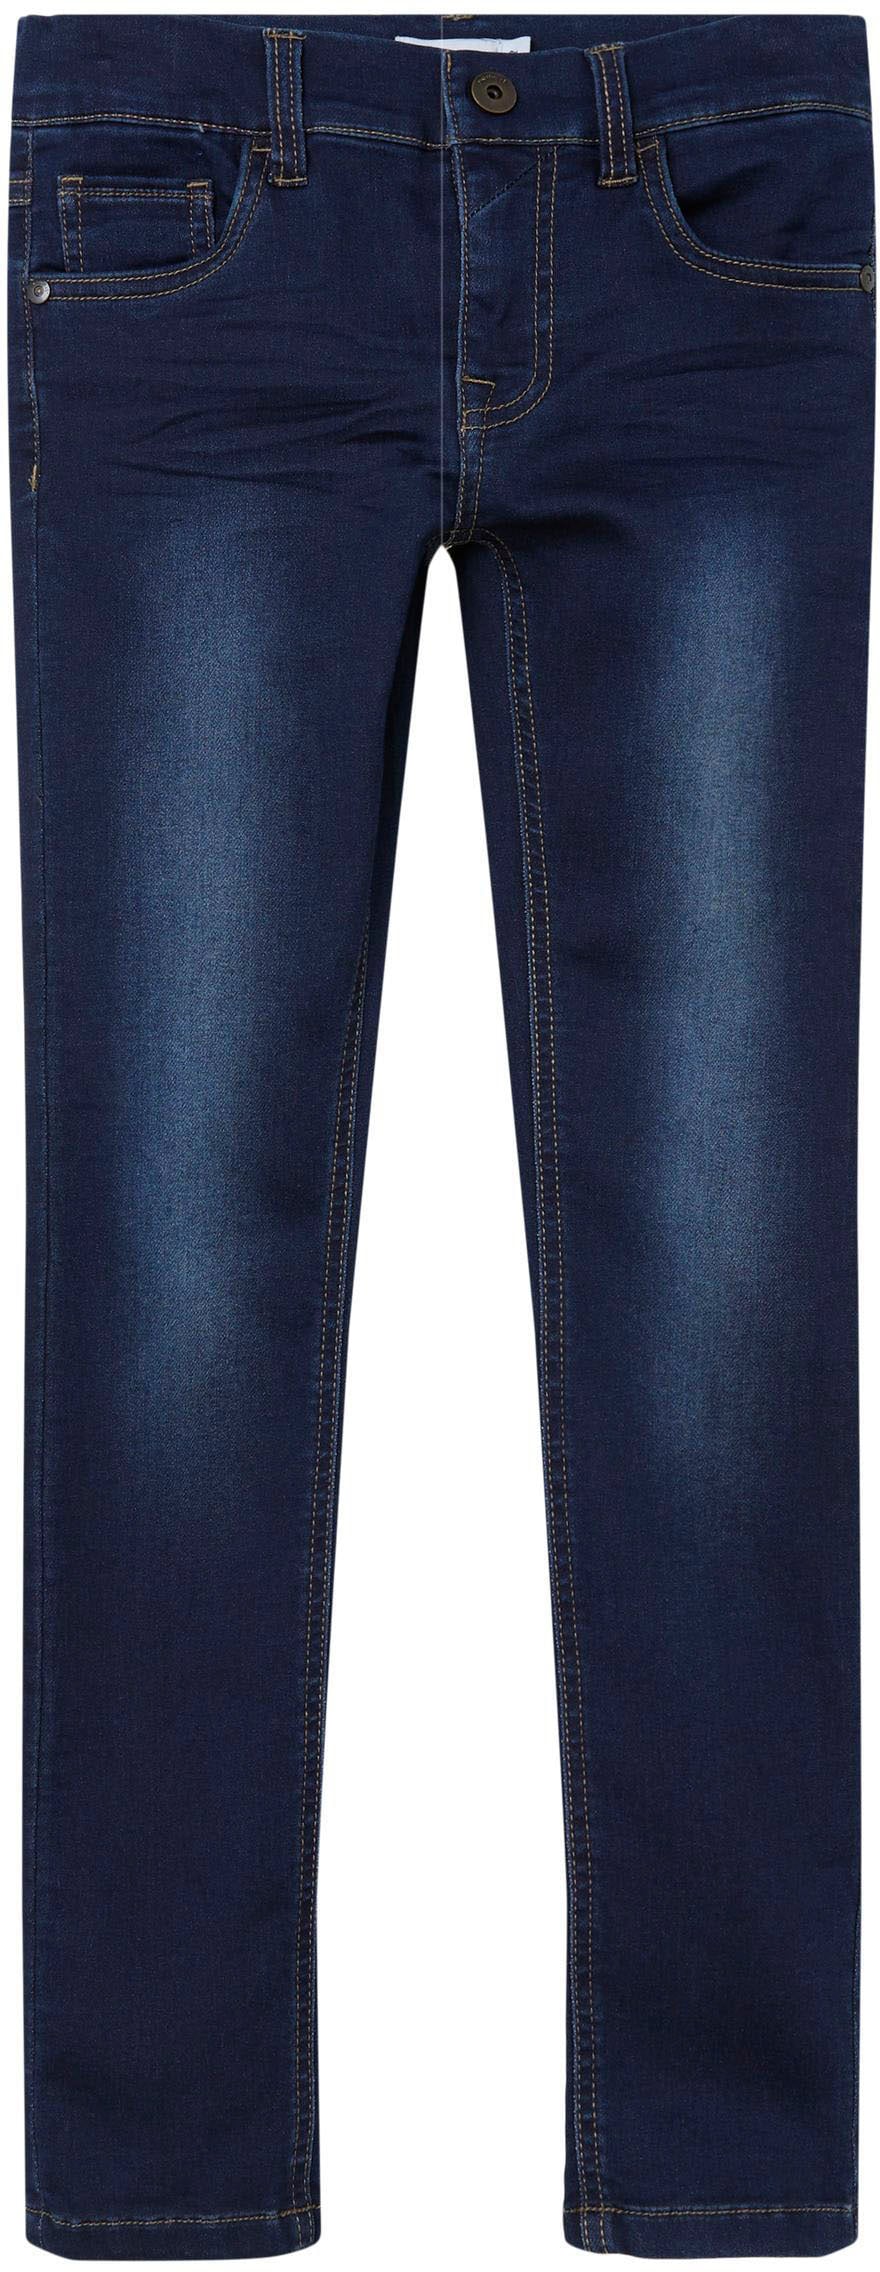 It »NKMTHEO ♕ Stretch-Jeans Name PANT« DNMTHAYER SWE COR1 bei